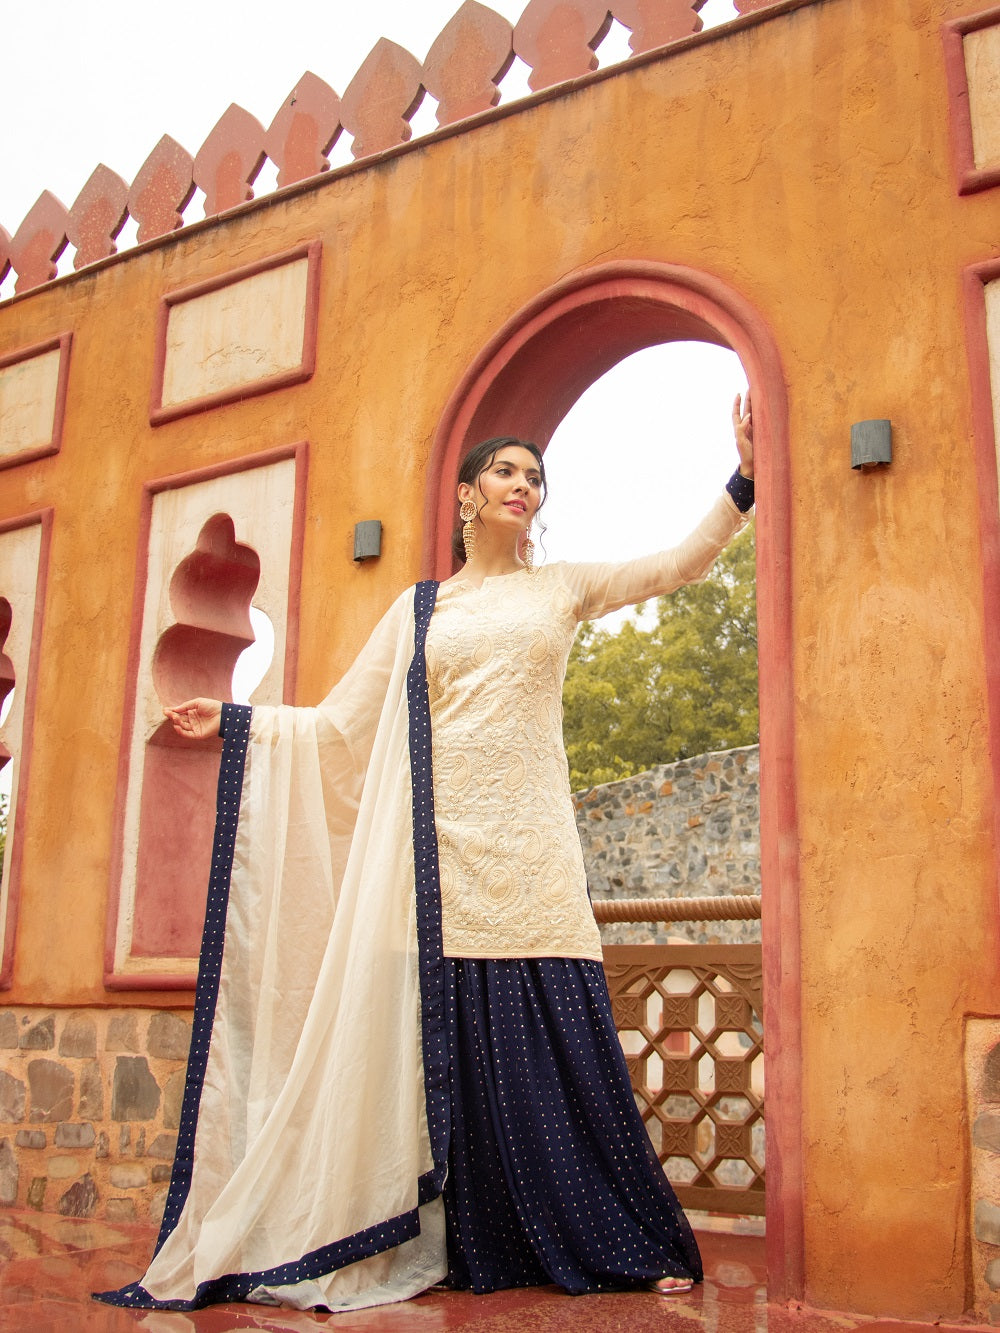 Be elegant and glamorous in this 3-piece formal set, crafted with exquisite chikankari and viscose georgette fabric with a traditional kajol inspired style. Lined with crepe fabric all over, this ivory Indo-Western look by Saadgi. chicken, chikan kurti, chikan suit, chikankari kurta for women, chikankari kurta, chikankari kurta set, chikankari short kurti, chikankari suit set, gharara, chikankari suits, hand crafted, lakhnavi kurti, lucknowi chikankari kurti, lucknowi kurti, lucknowi